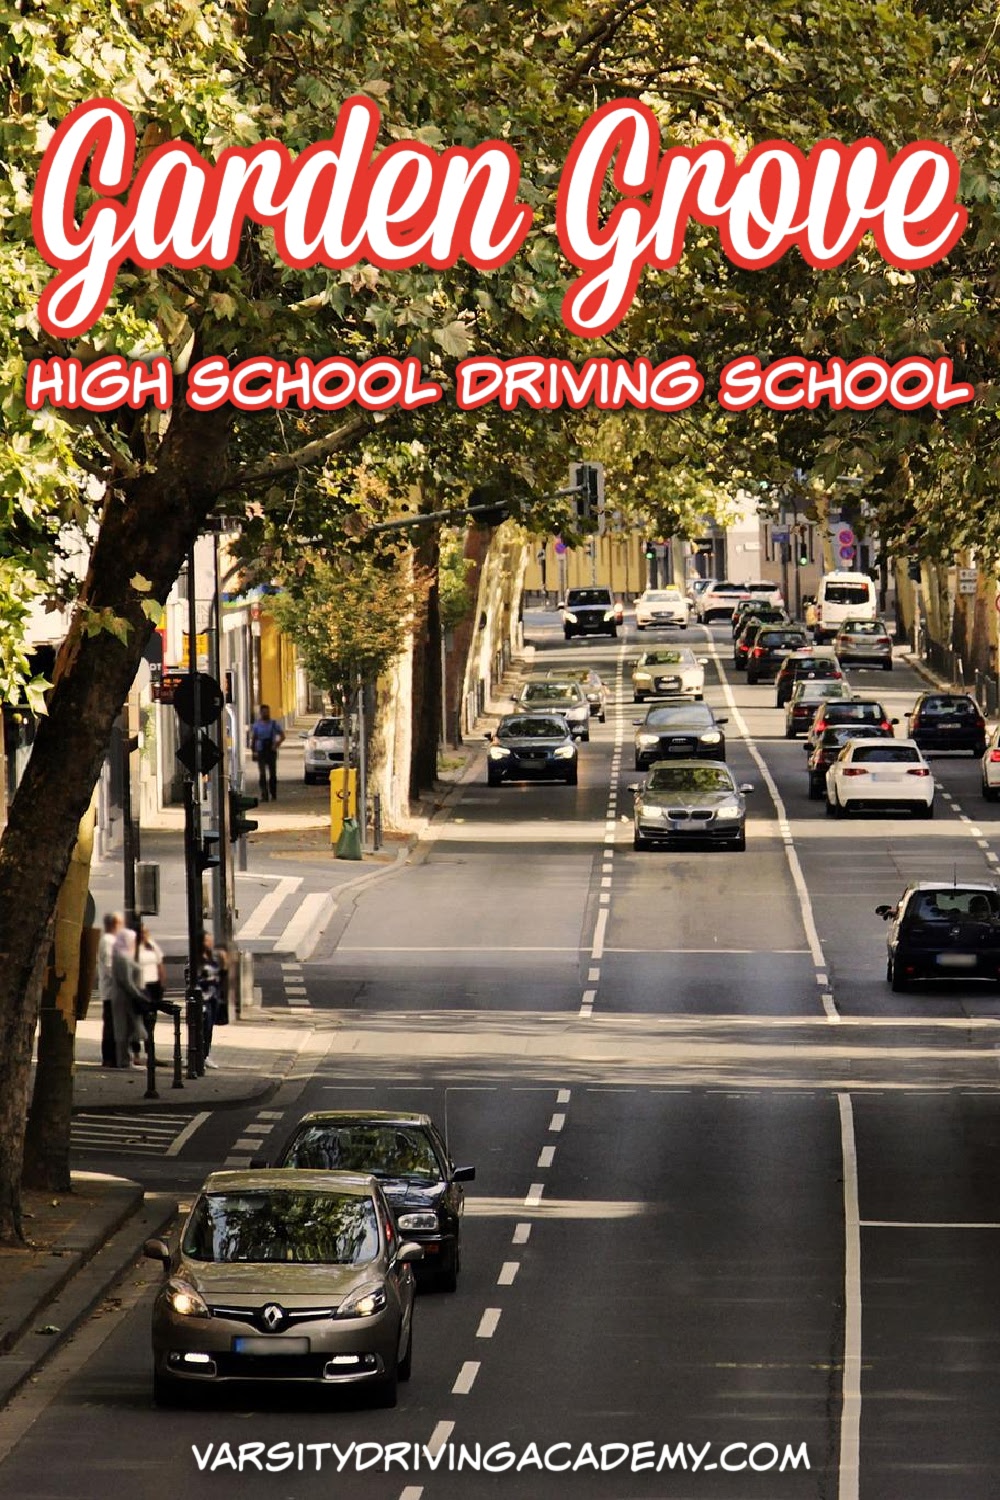 The best Garden Grove High School driving school is Varsity Driving Academy where services come together to make the best experience.